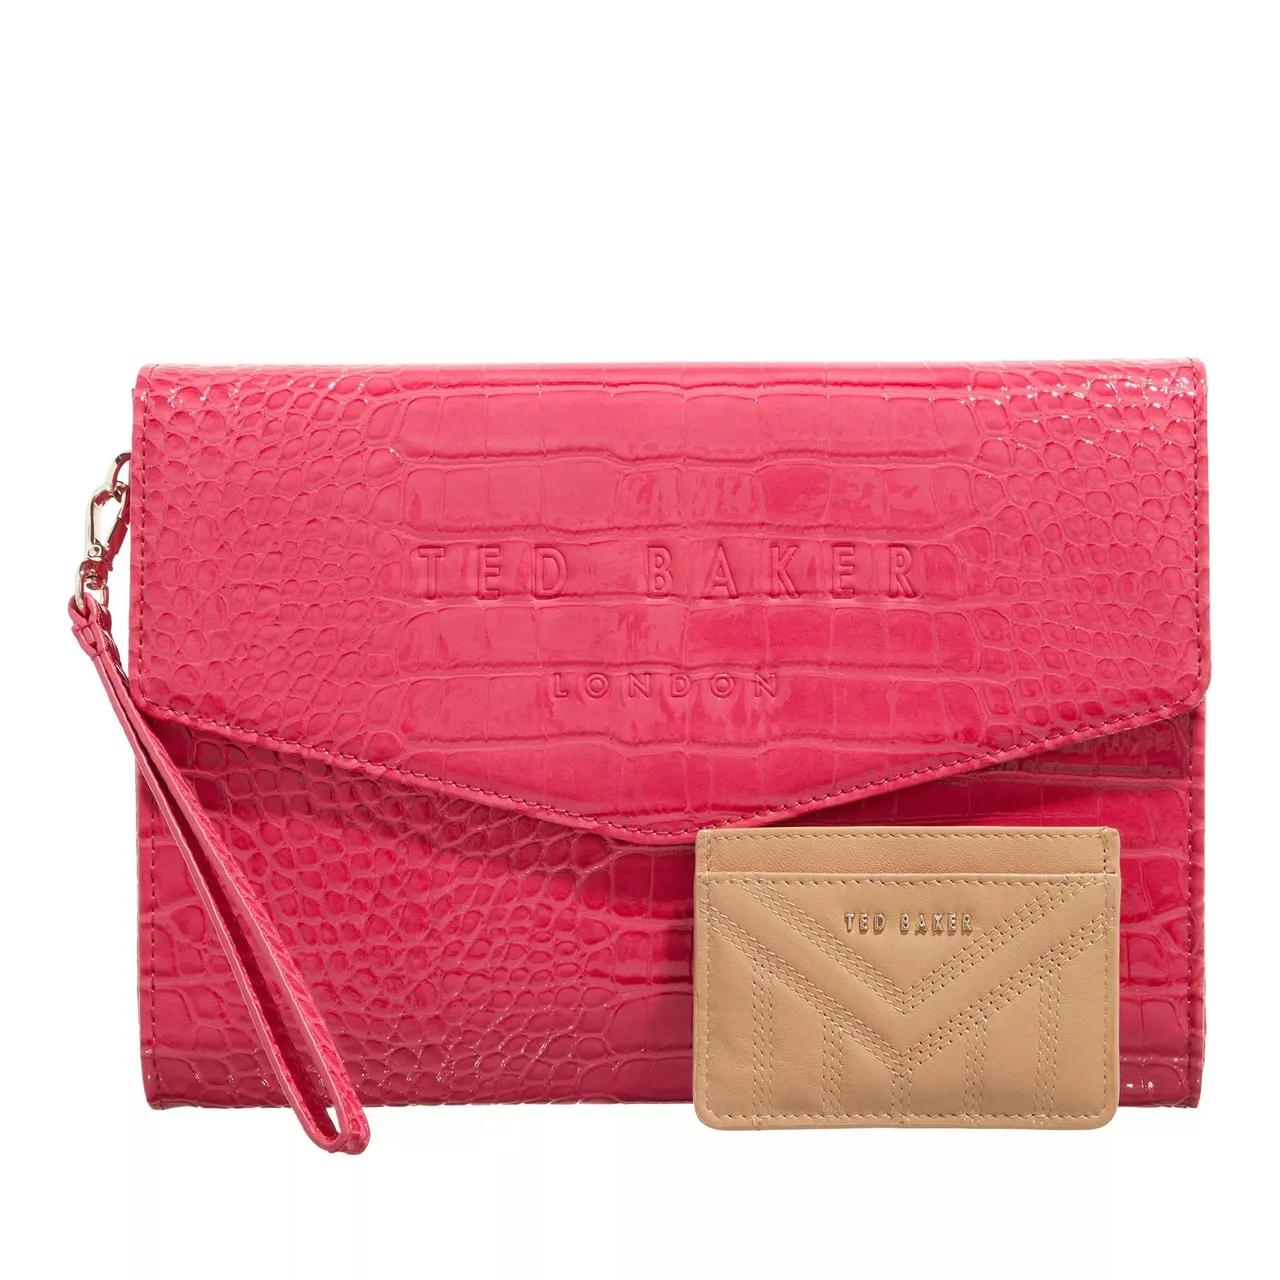 Ted Baker Clutches - Crocey and Ayani Bundle - pink - Clutches for ladies